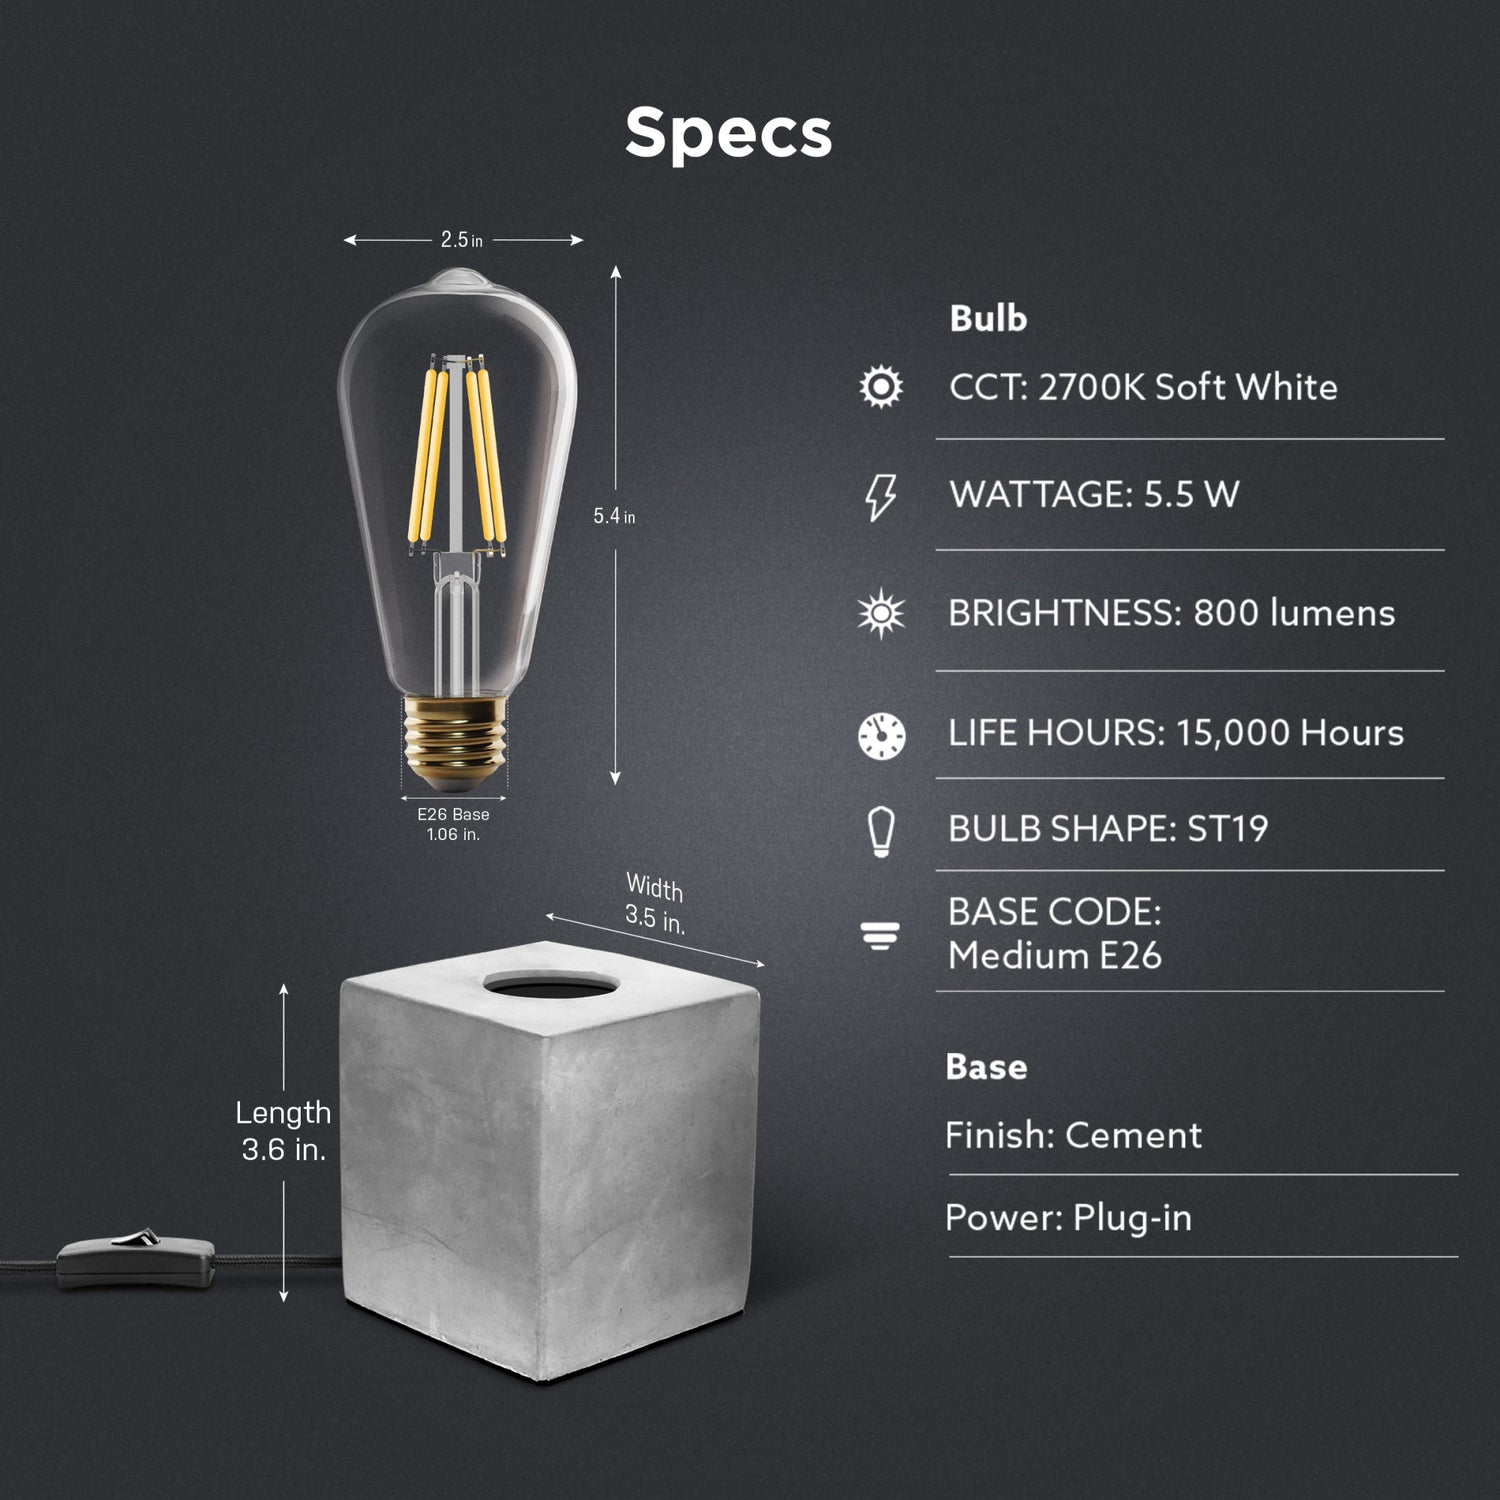 3.5 in. Cube Vintage Industrial Style Table Lamp Base With Clear ST19 Bulb 5.5W Vintage LED